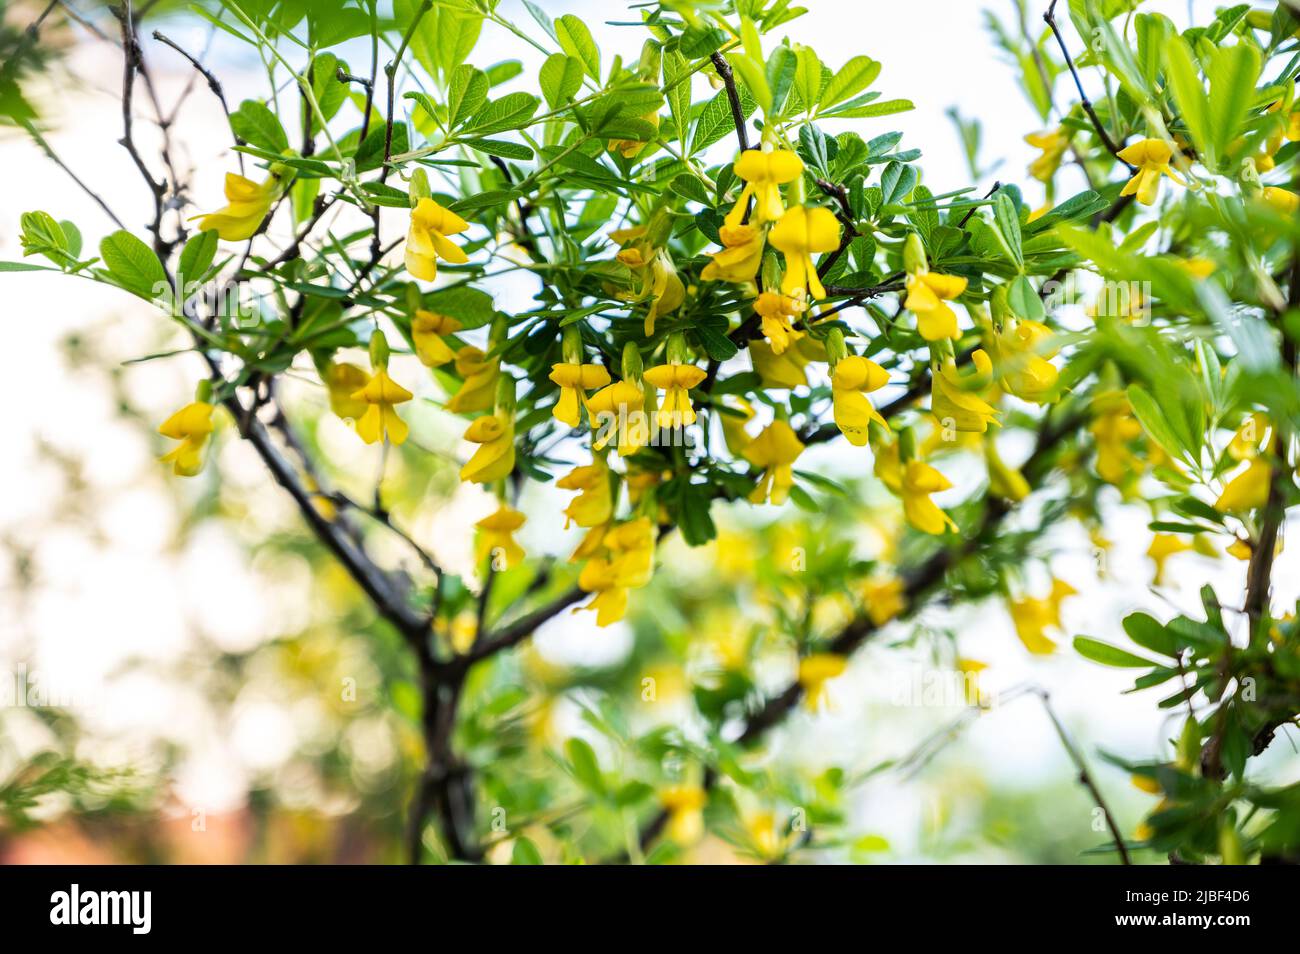 Flowers of Caragana, close-up. Shallow depth of field. Stock Photo